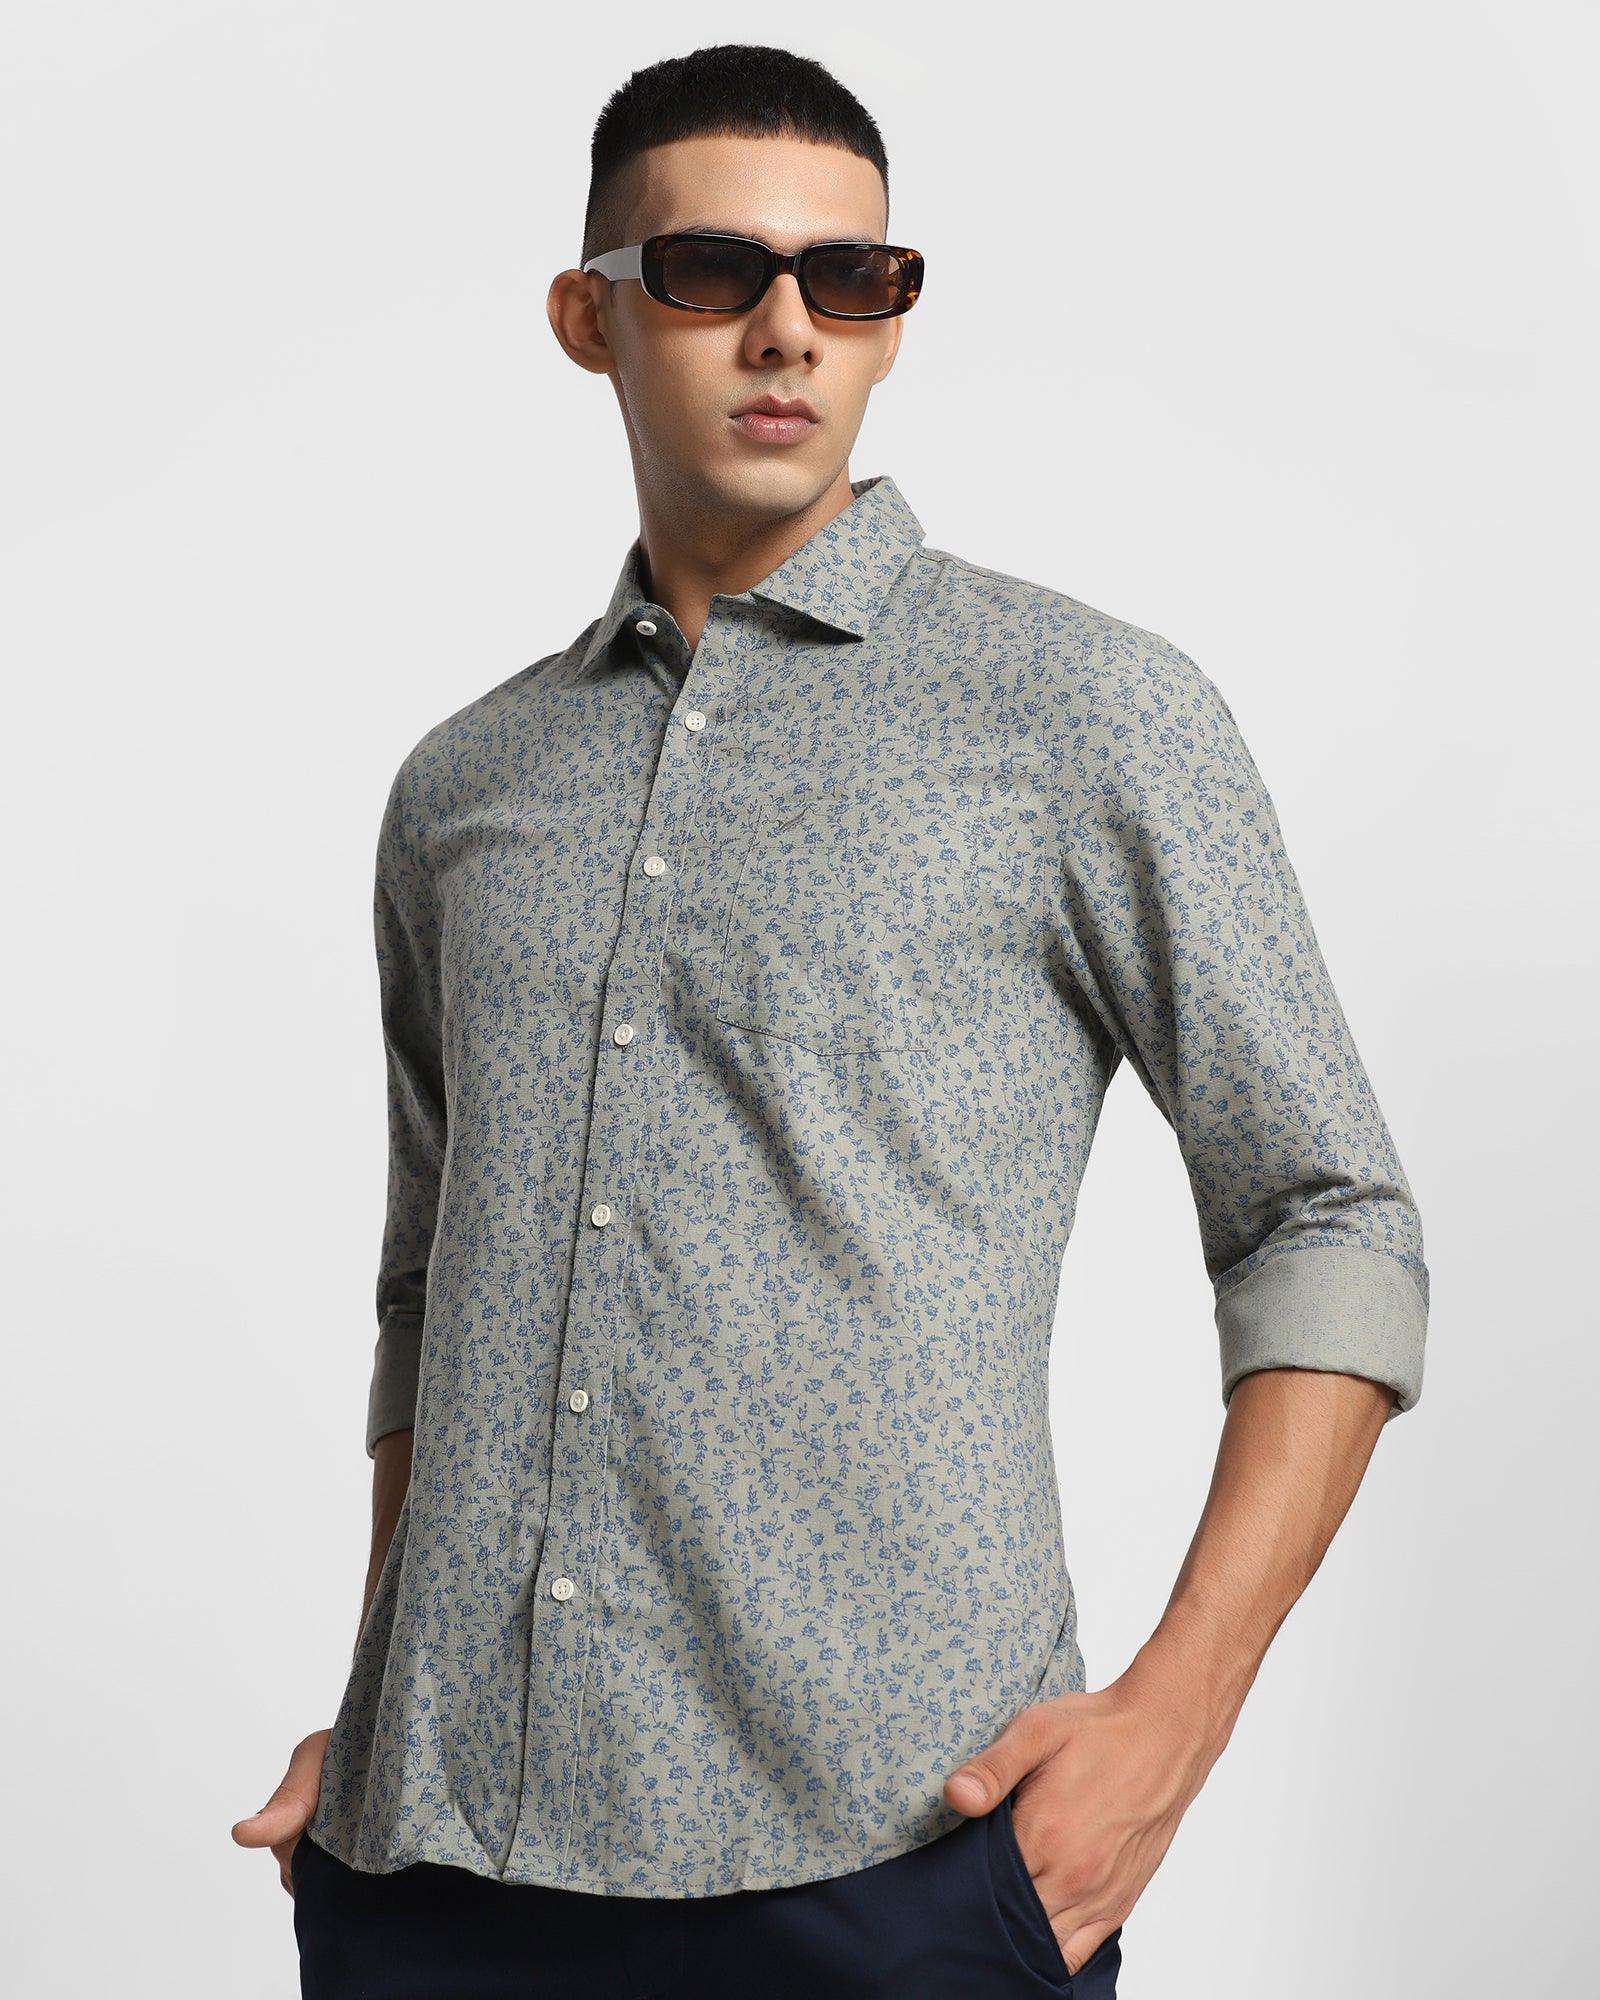 Linen Casual Olive Printed Shirt - Peter